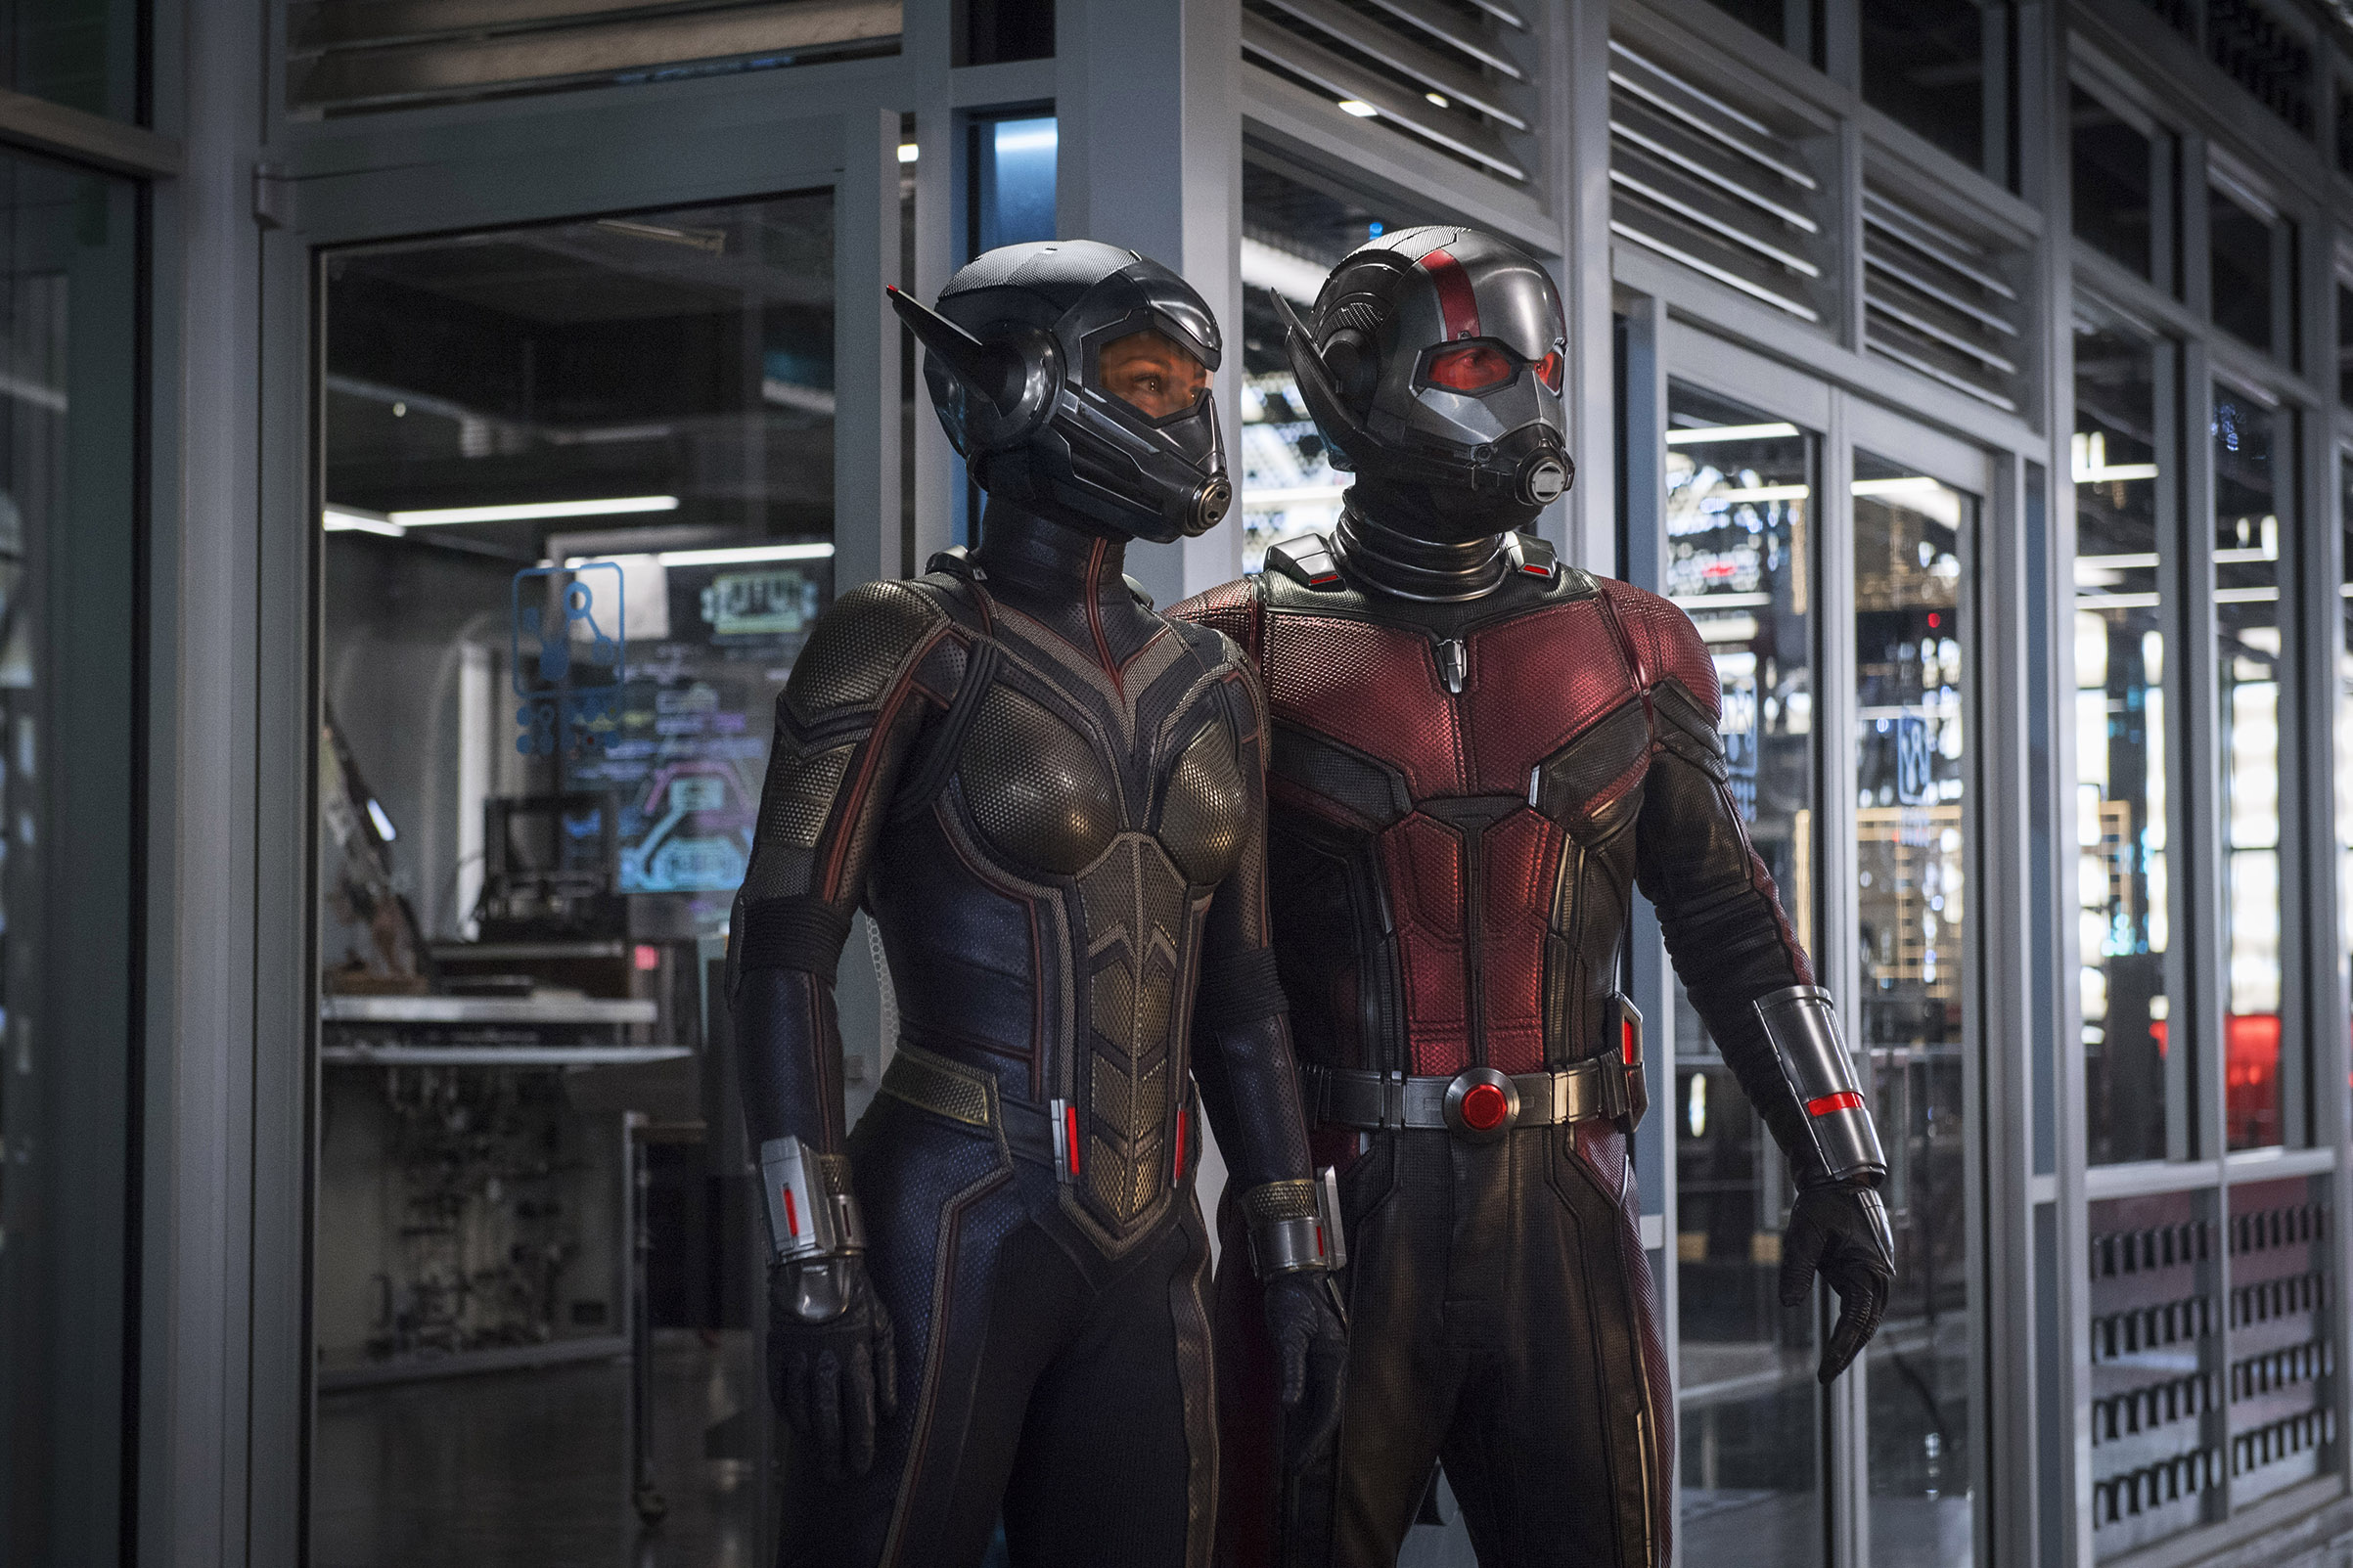 Paul Rudd and Evangeline Lilly in “Ant-Man and the Wasp”. (Marvel Studios)